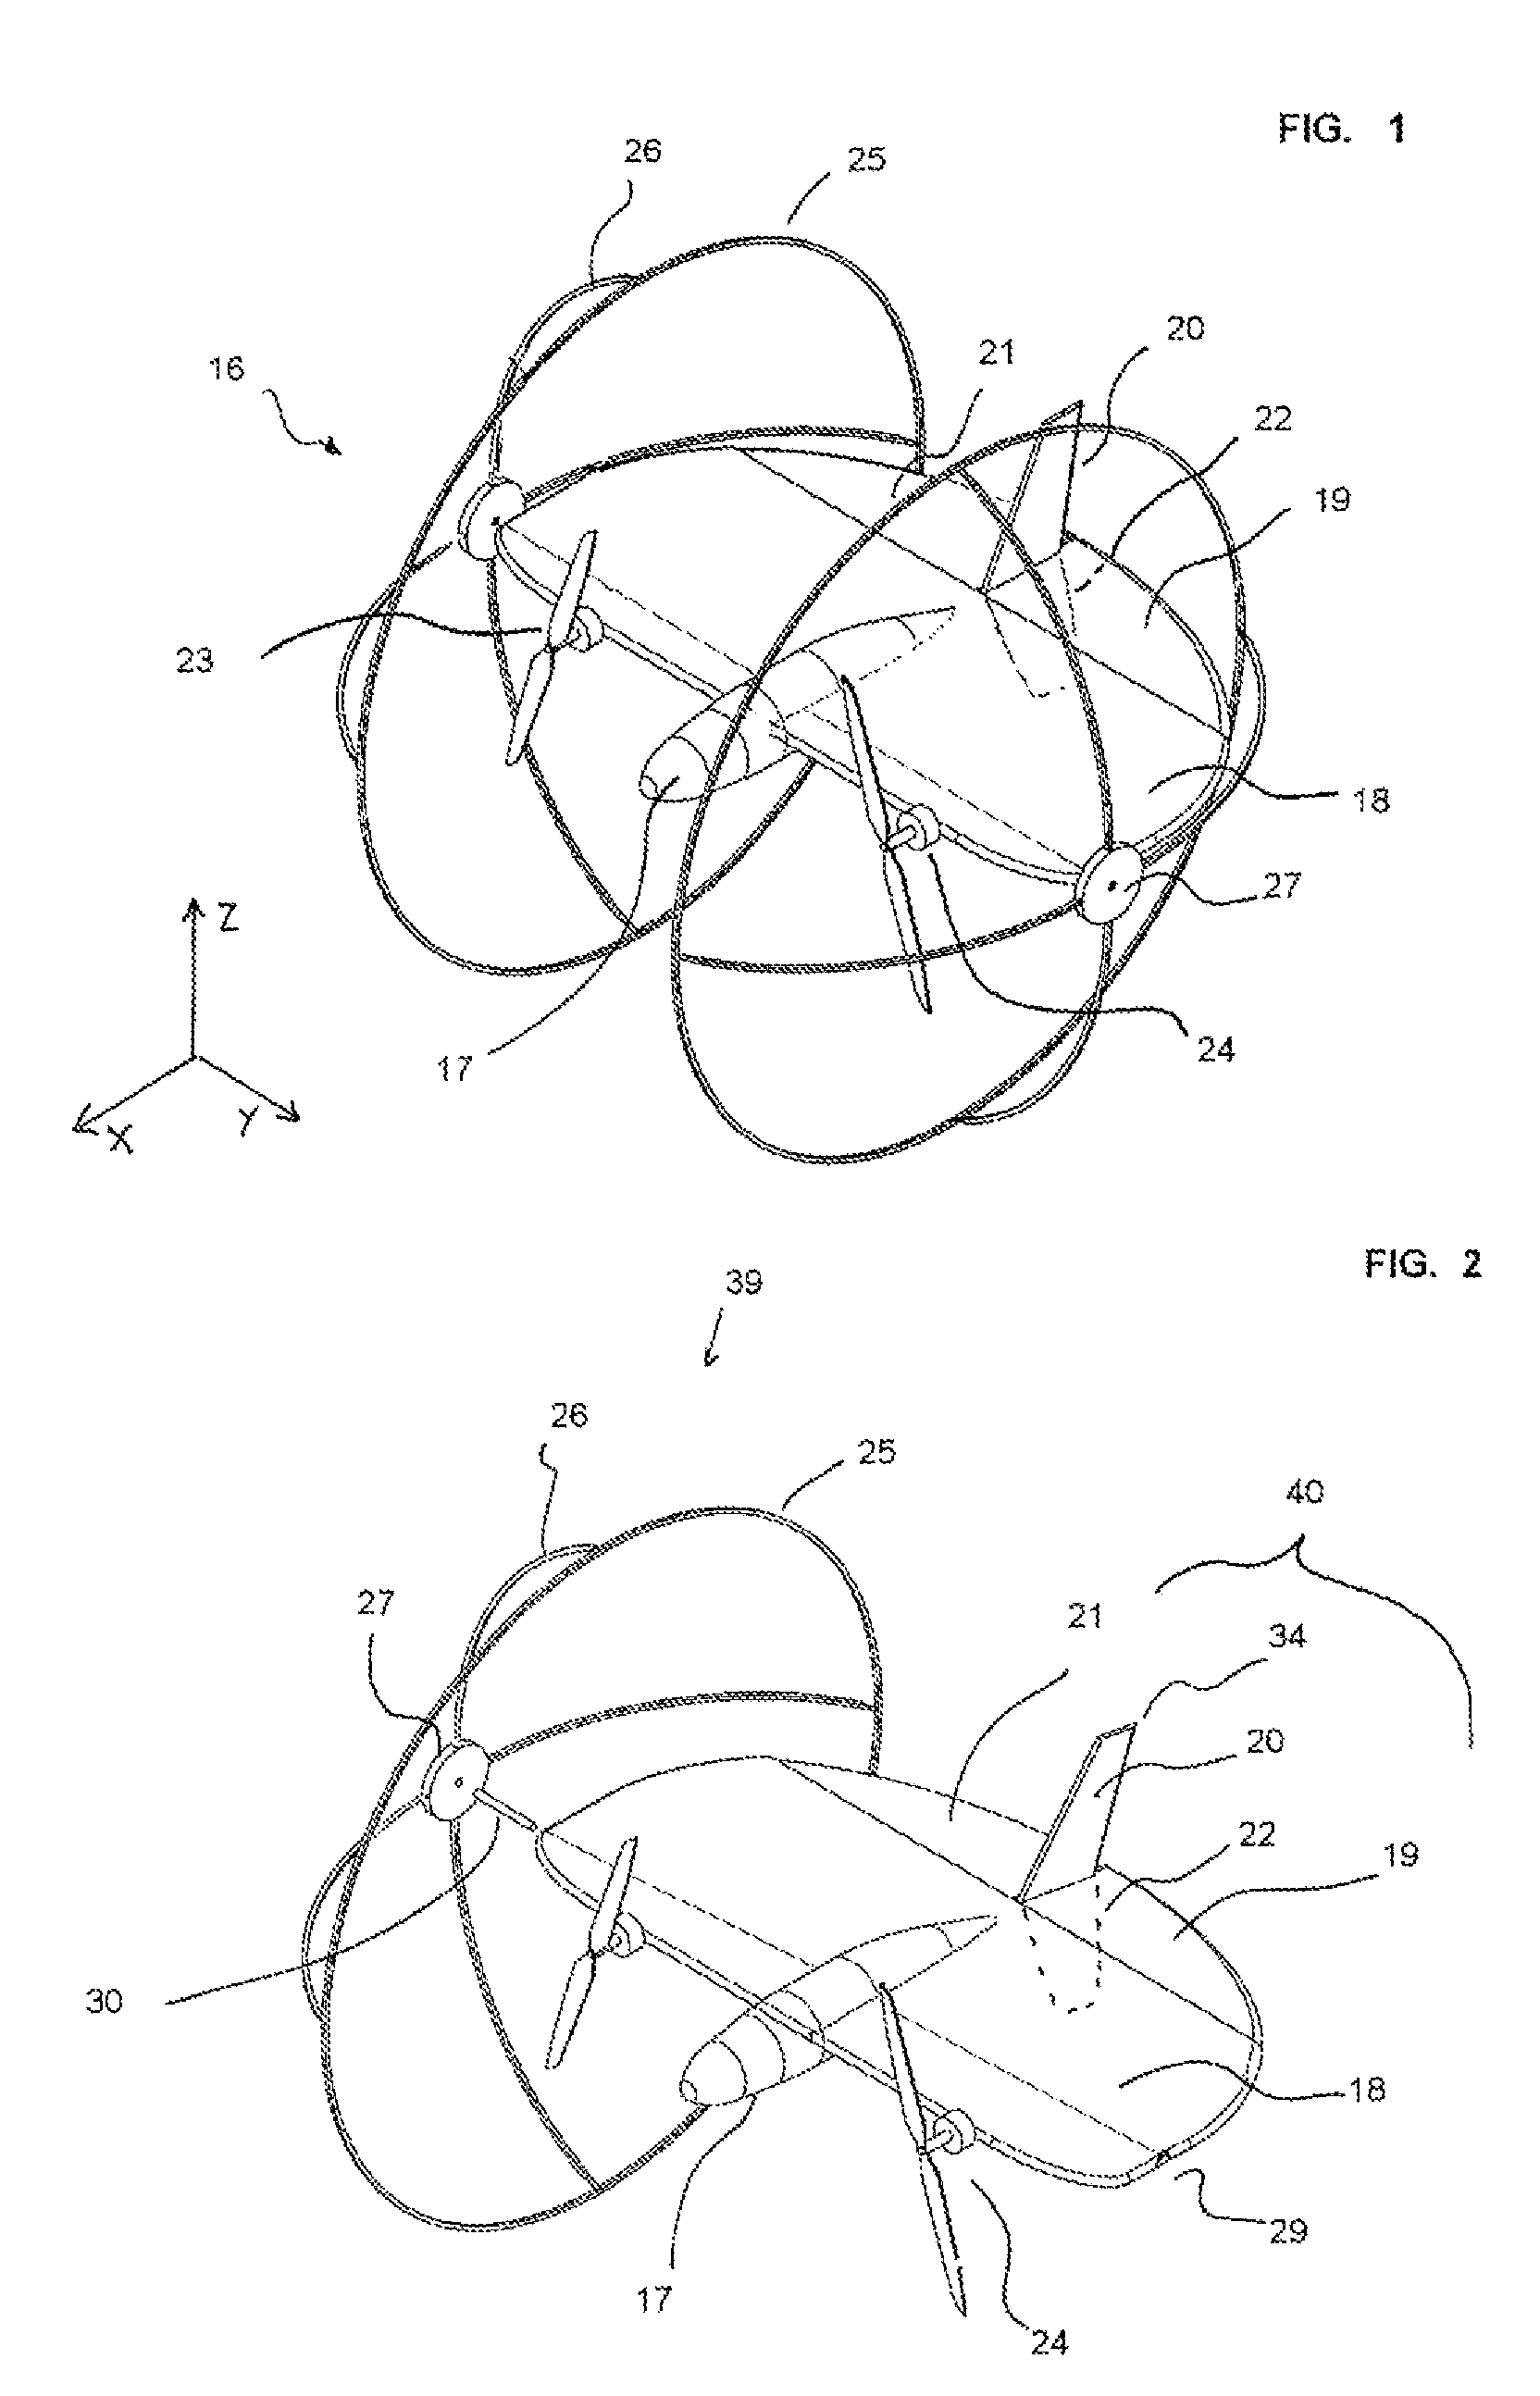 Remotely controlled micro/nanoscale aerial vehicle comprising a system for traveling on the ground, vertical takeoff, and landing